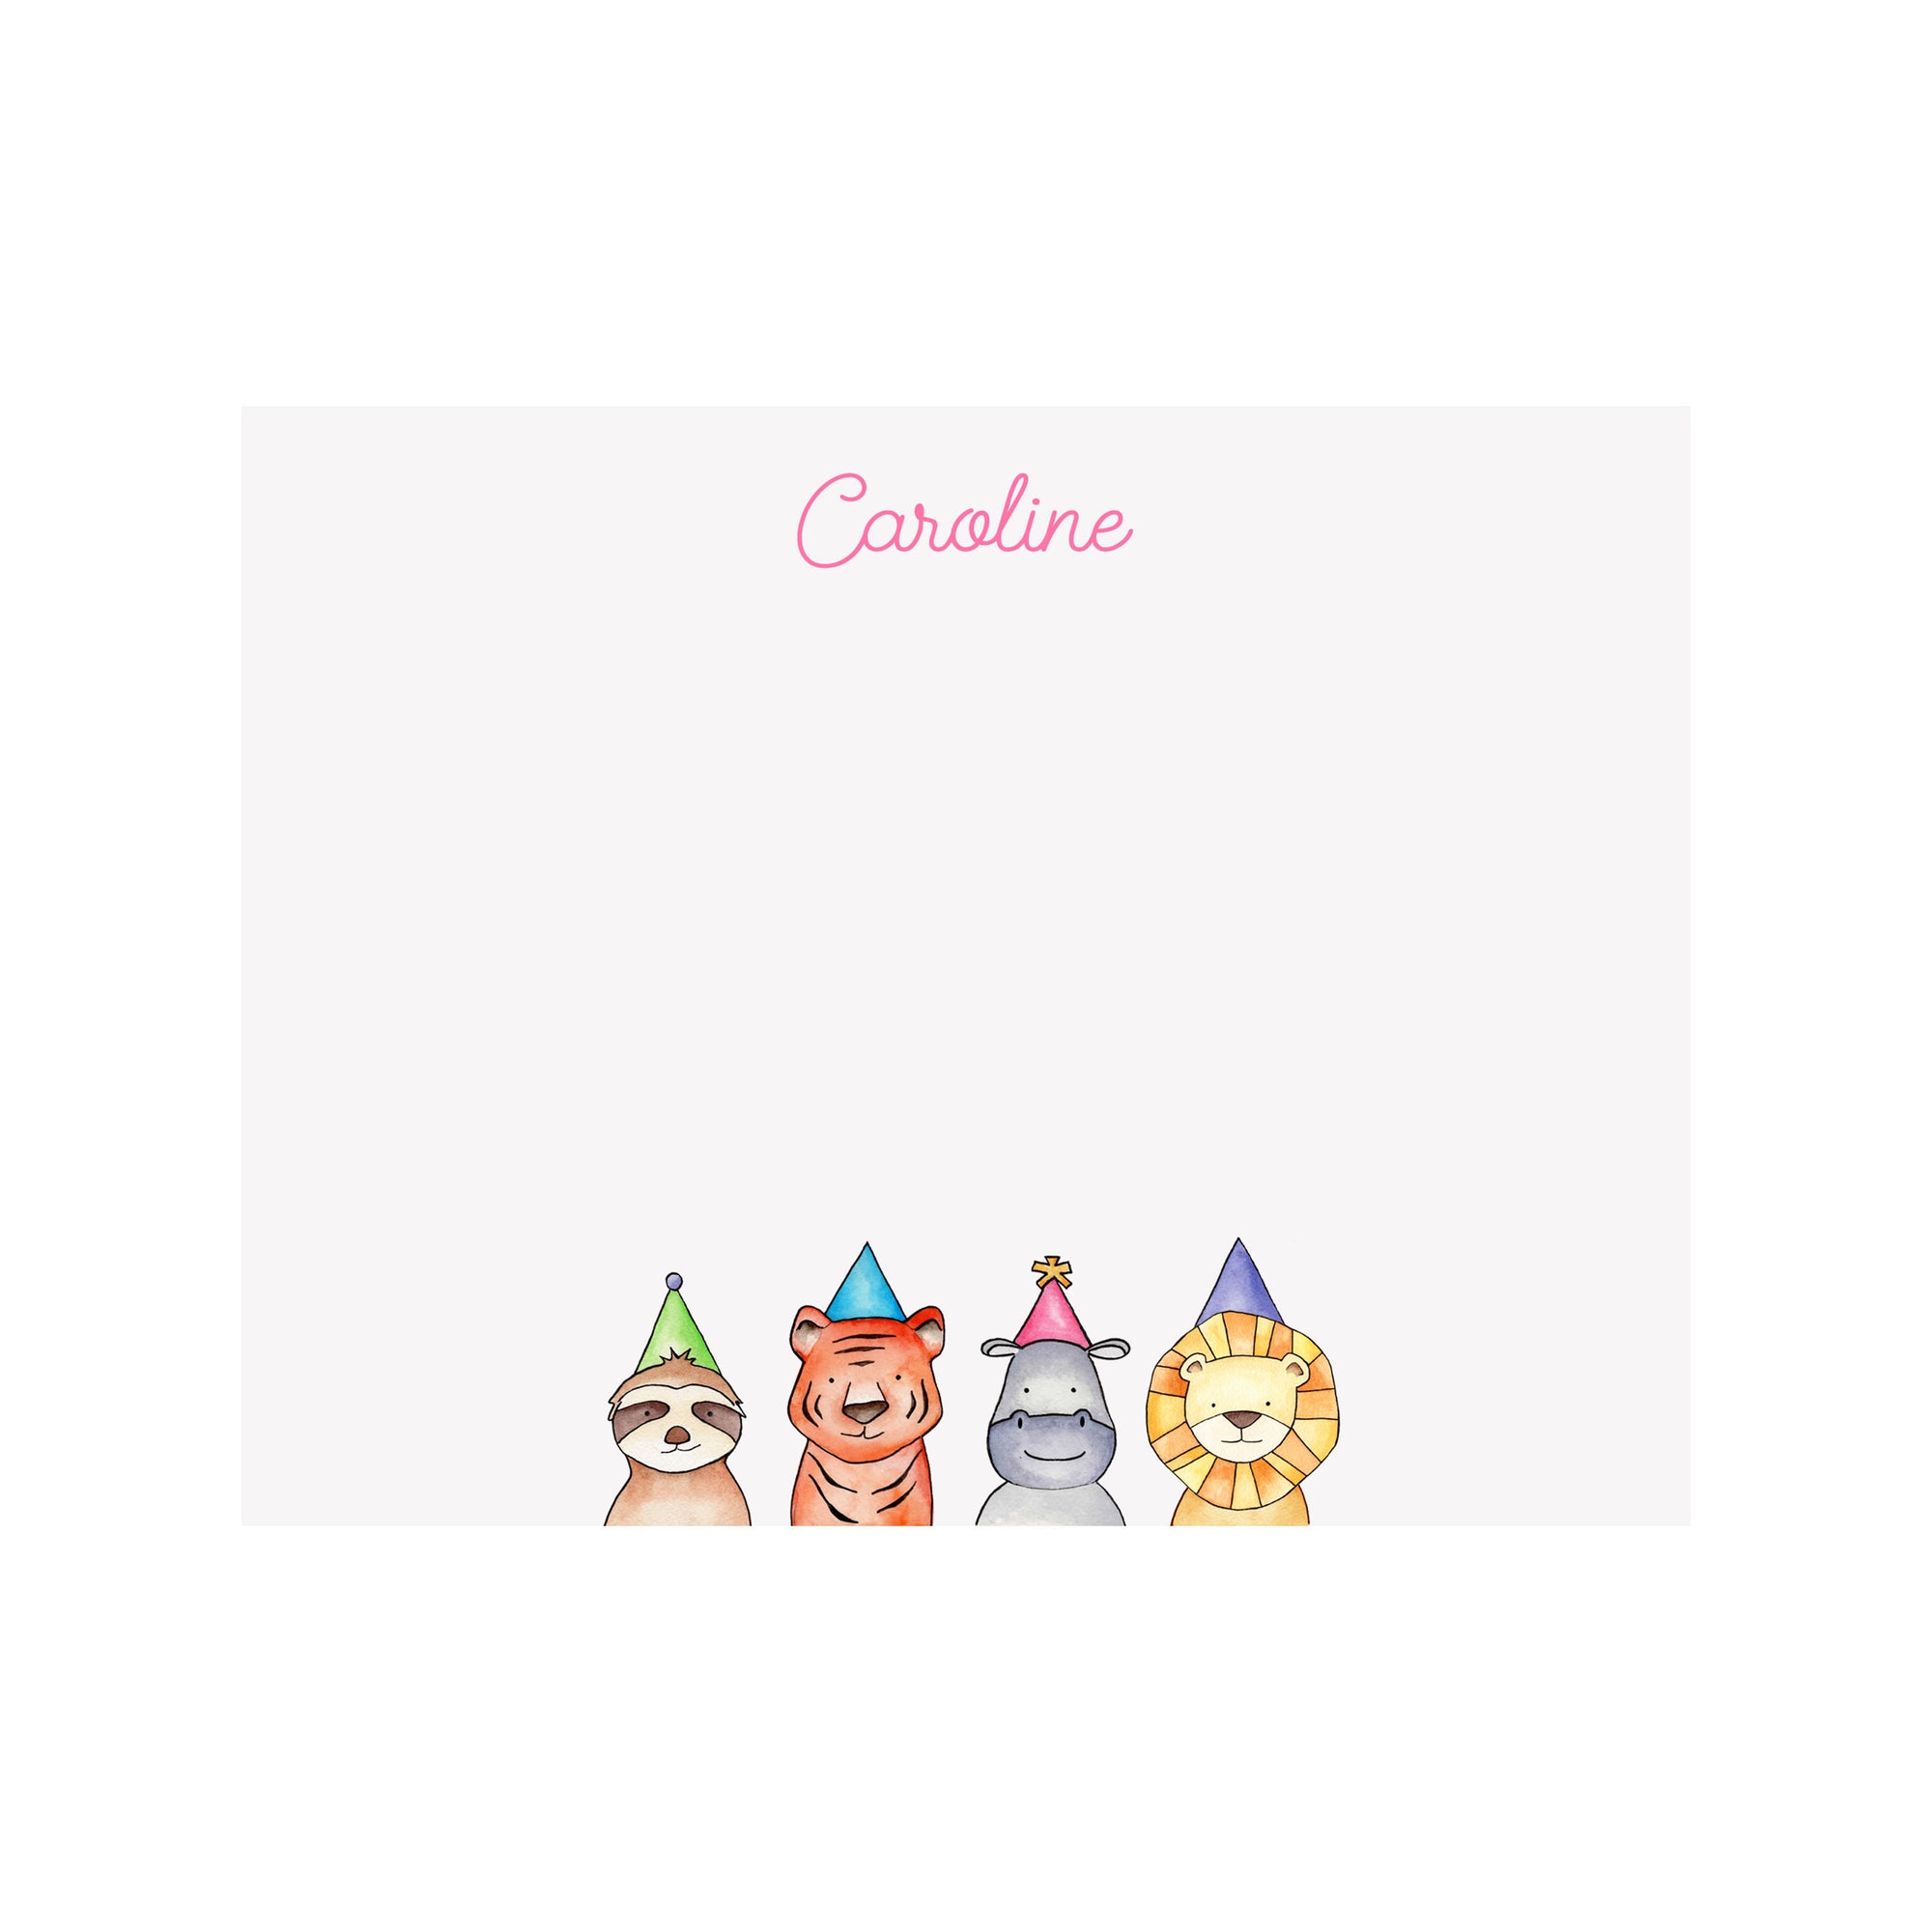 Party Animals Stationery